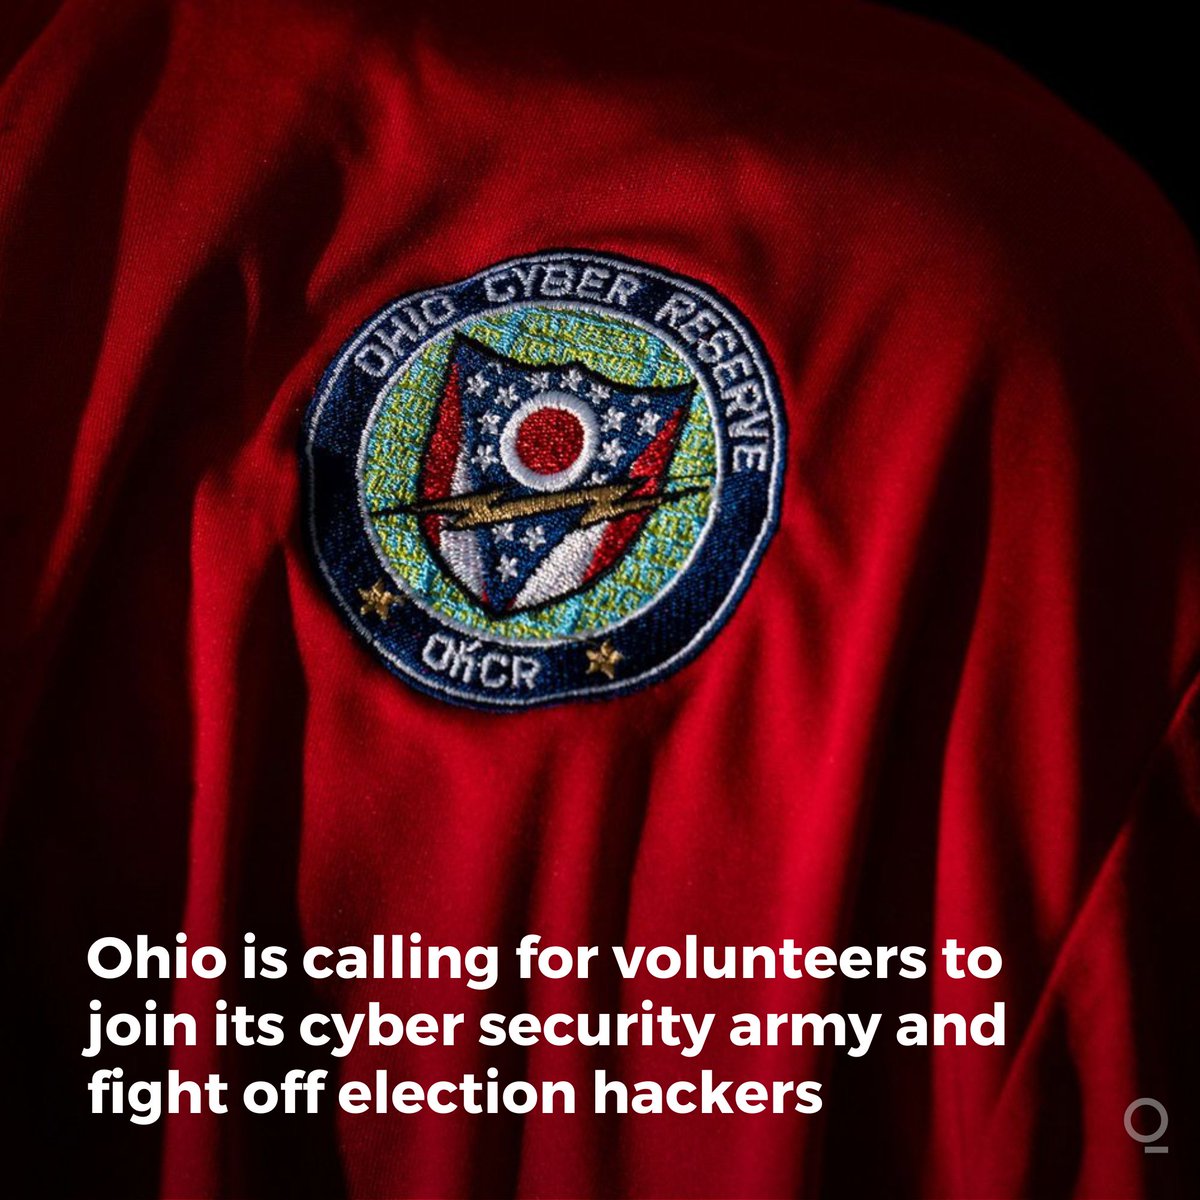 Well done @OhioCyber and #OhioCyberRangeInstitute! We're excited to have local #cyber initiatives like these to work with. @spia_uc @ucccsp #SolvingProblemsThatMatter 